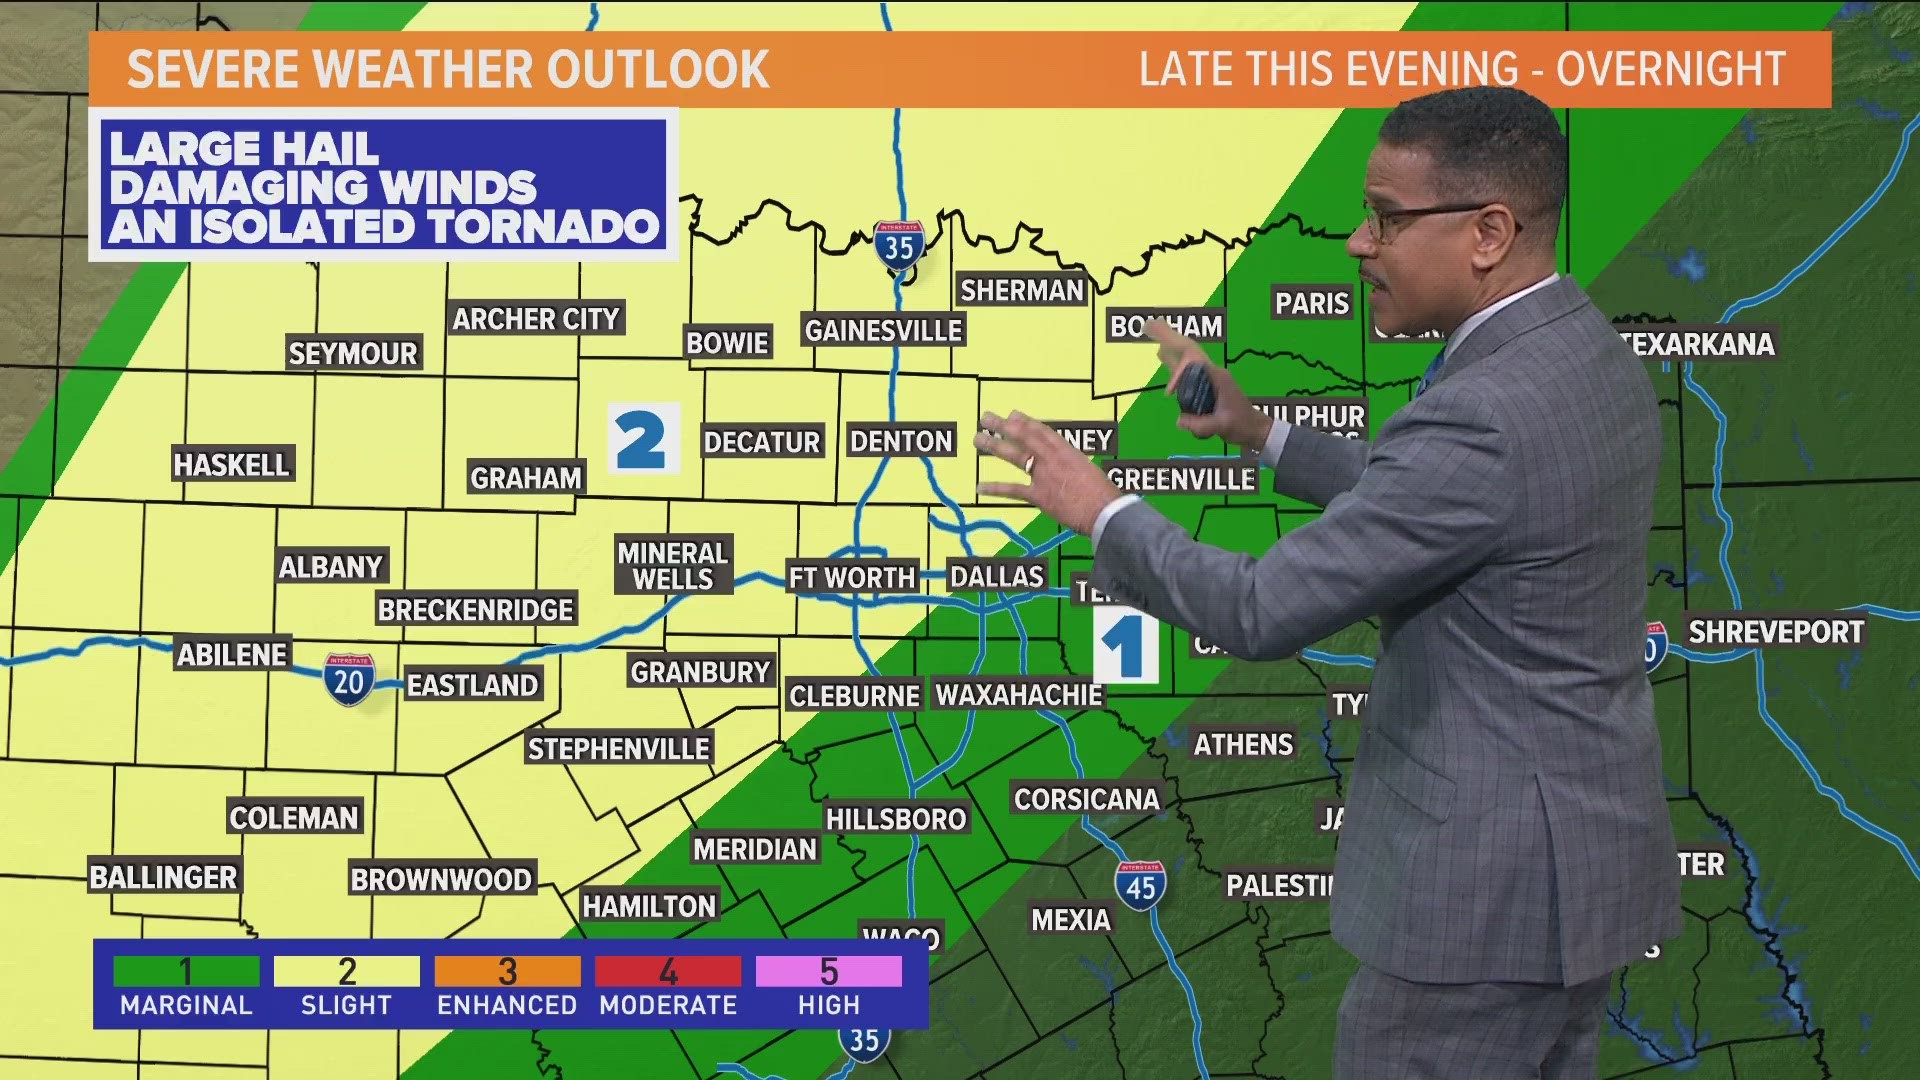 WFAA meteorologist gives a forecast of rain and potential severe weather that's expected to arrive late Thursday night.